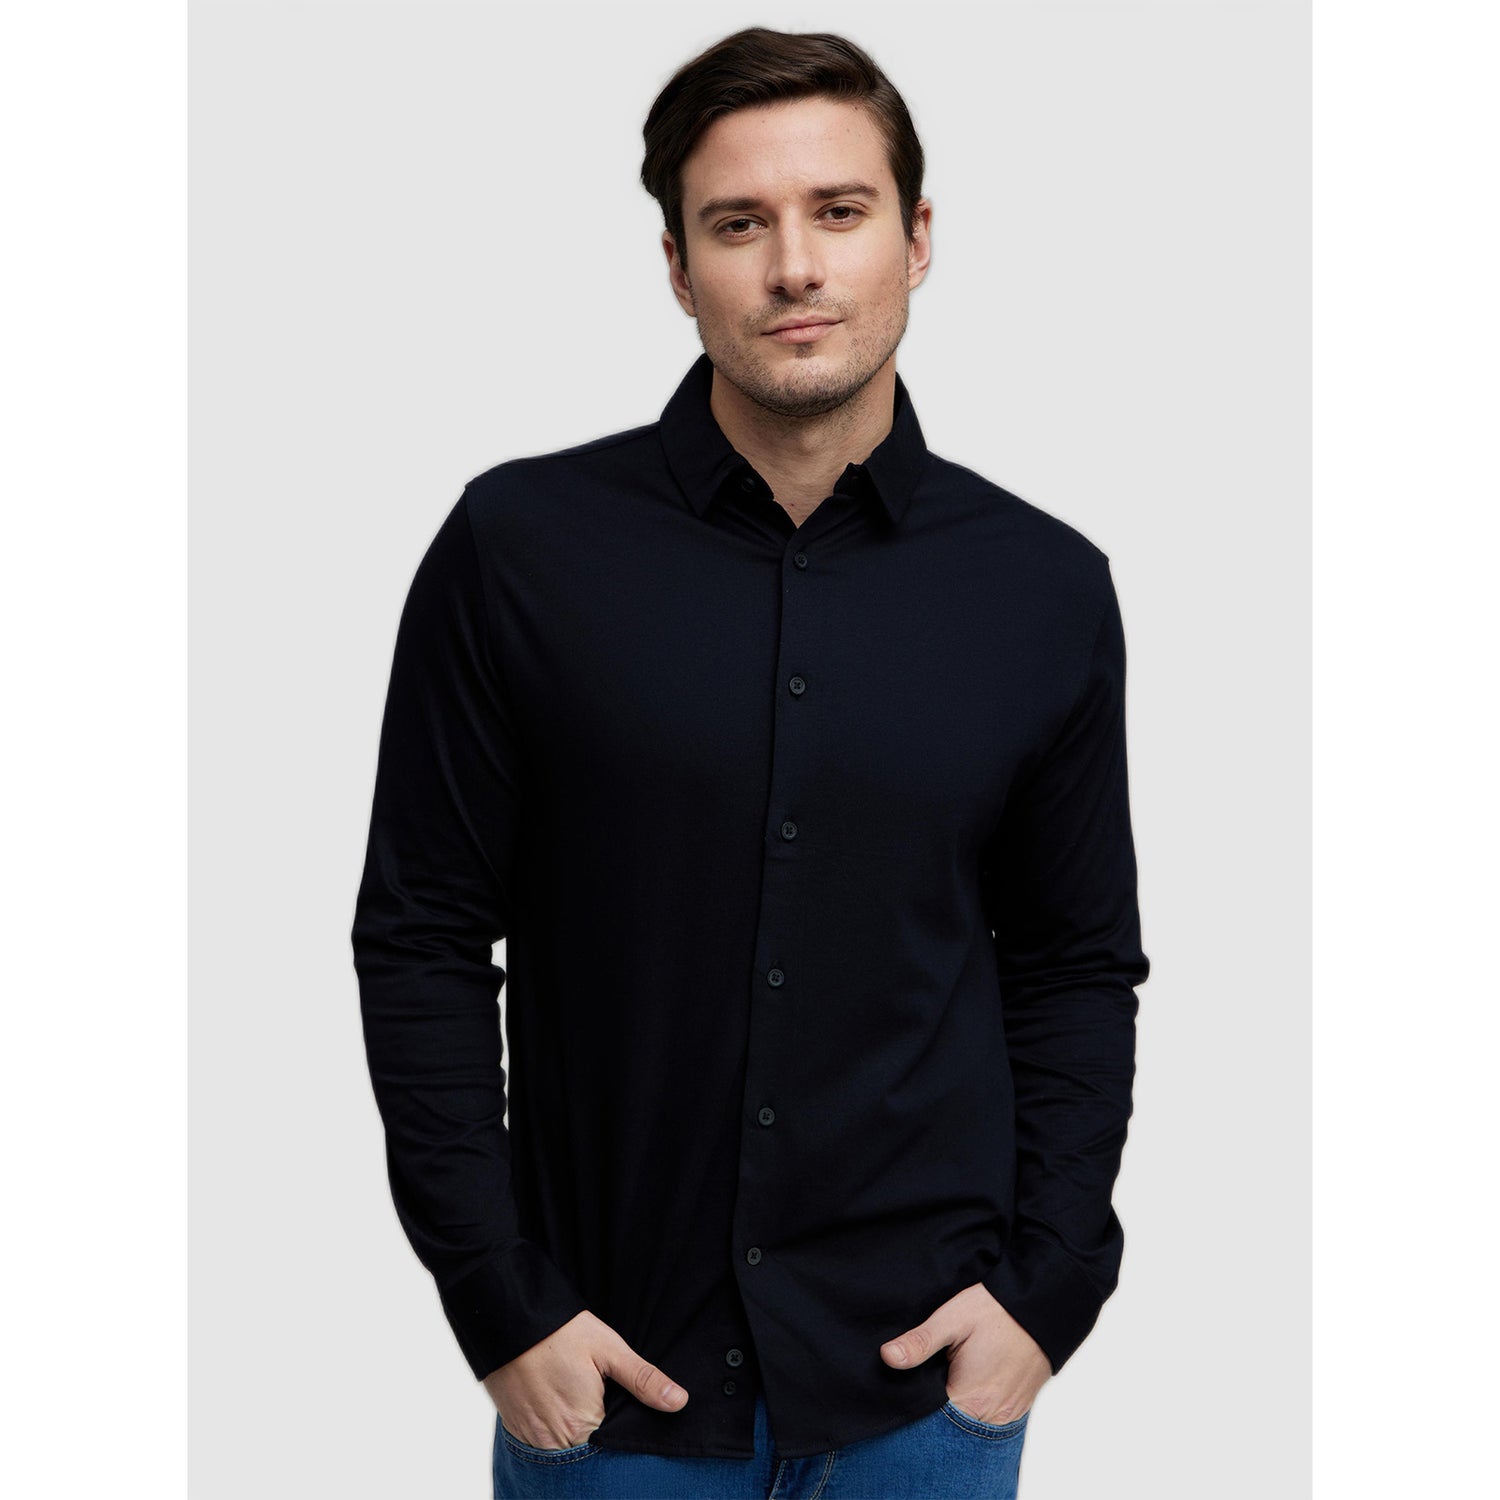 Men's Black Solid Casual Shirts (Various Sizes)